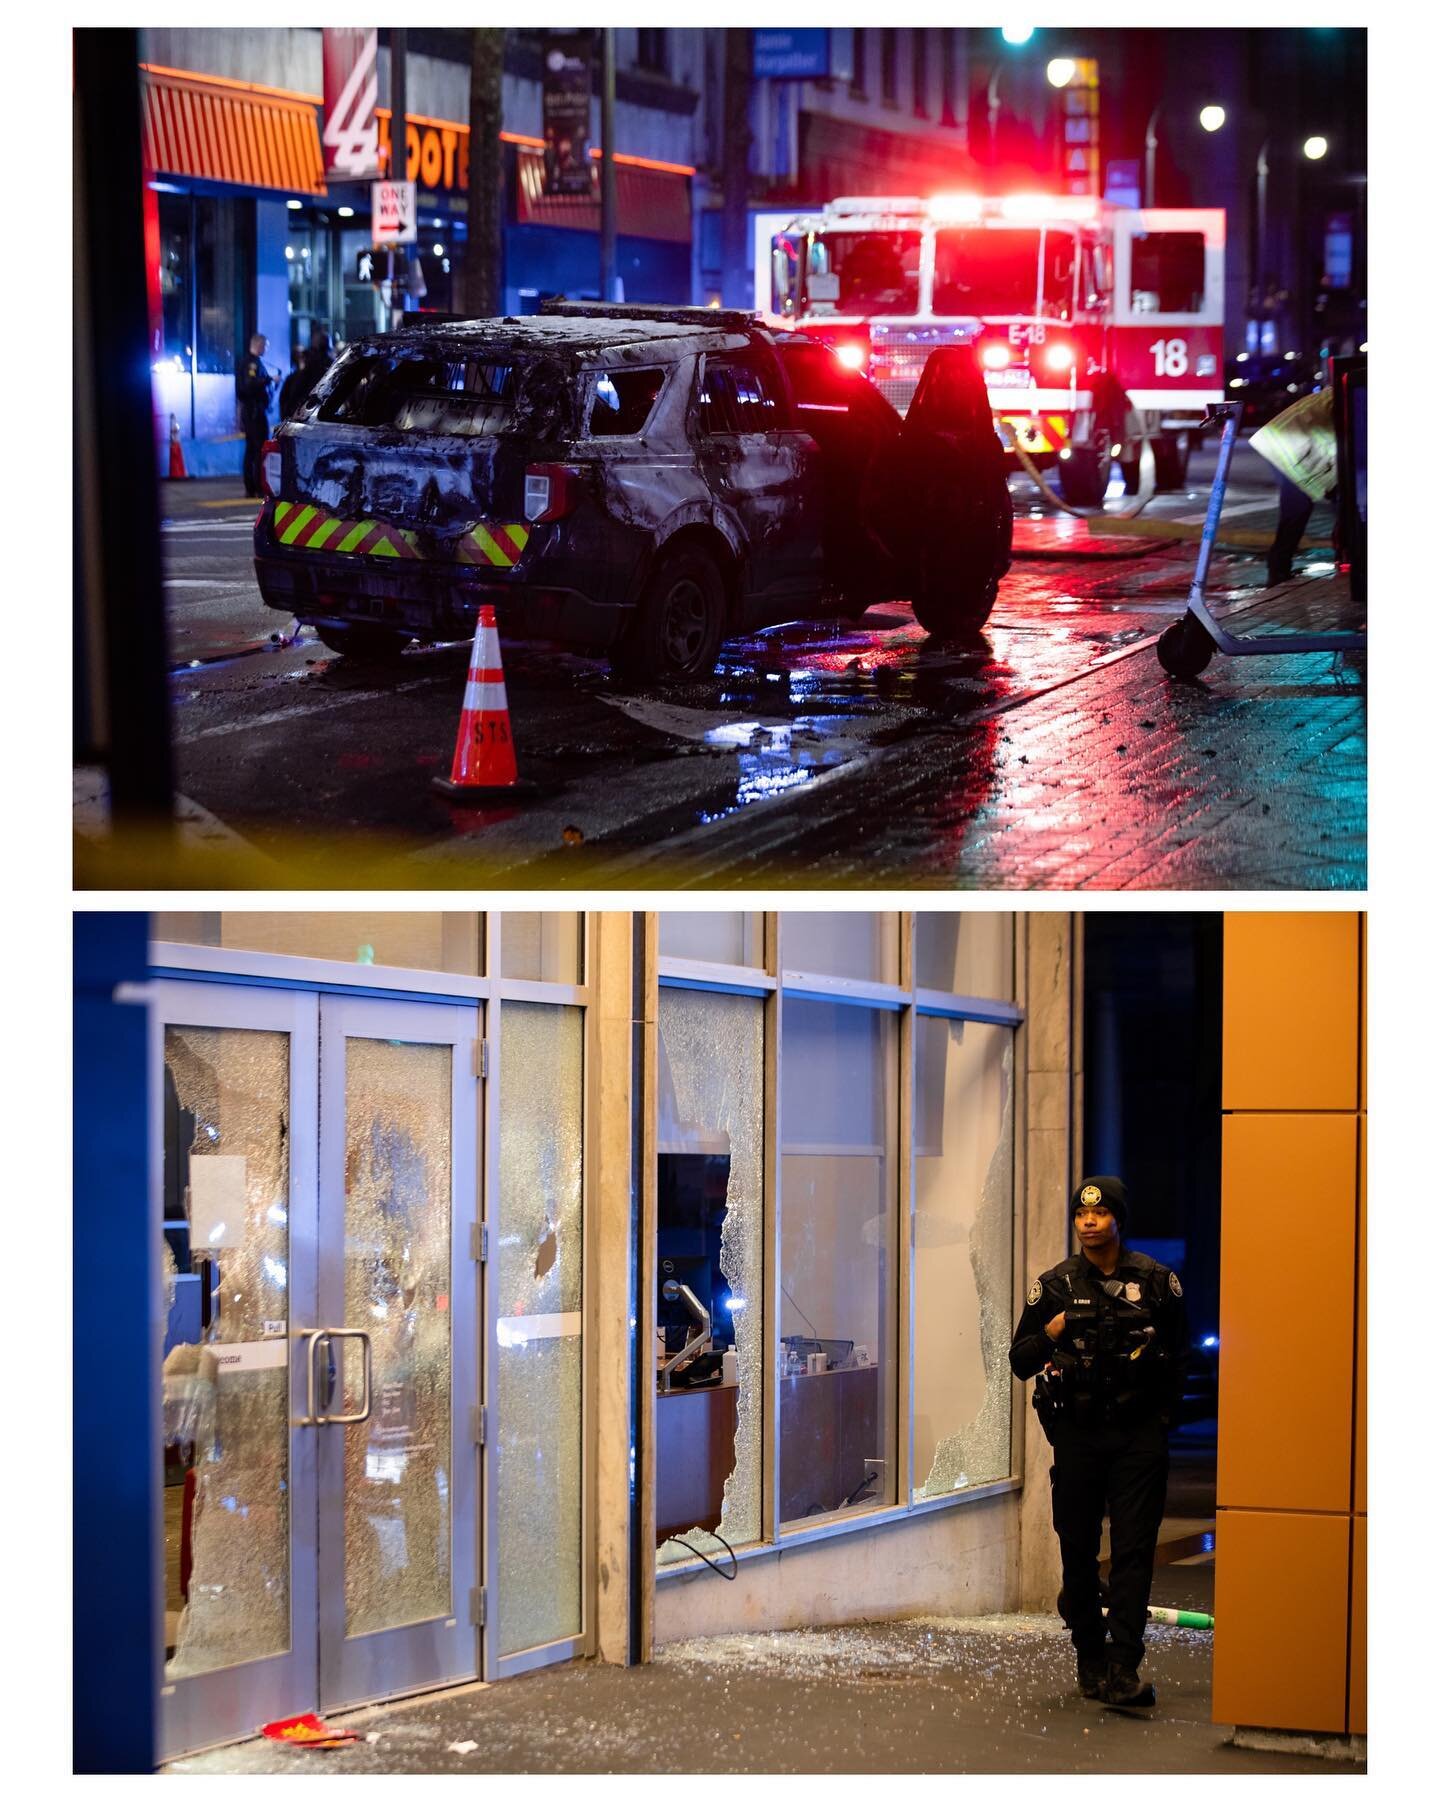 A peaceful protest in Downtown Atlanta turned violent tonight. An Atlanta Police Crusier was set on fire, and multiple businesses were vandalized. Atlanta Mayor Andrea Dickens said in a press conference earlier tonight that six people were arrested i